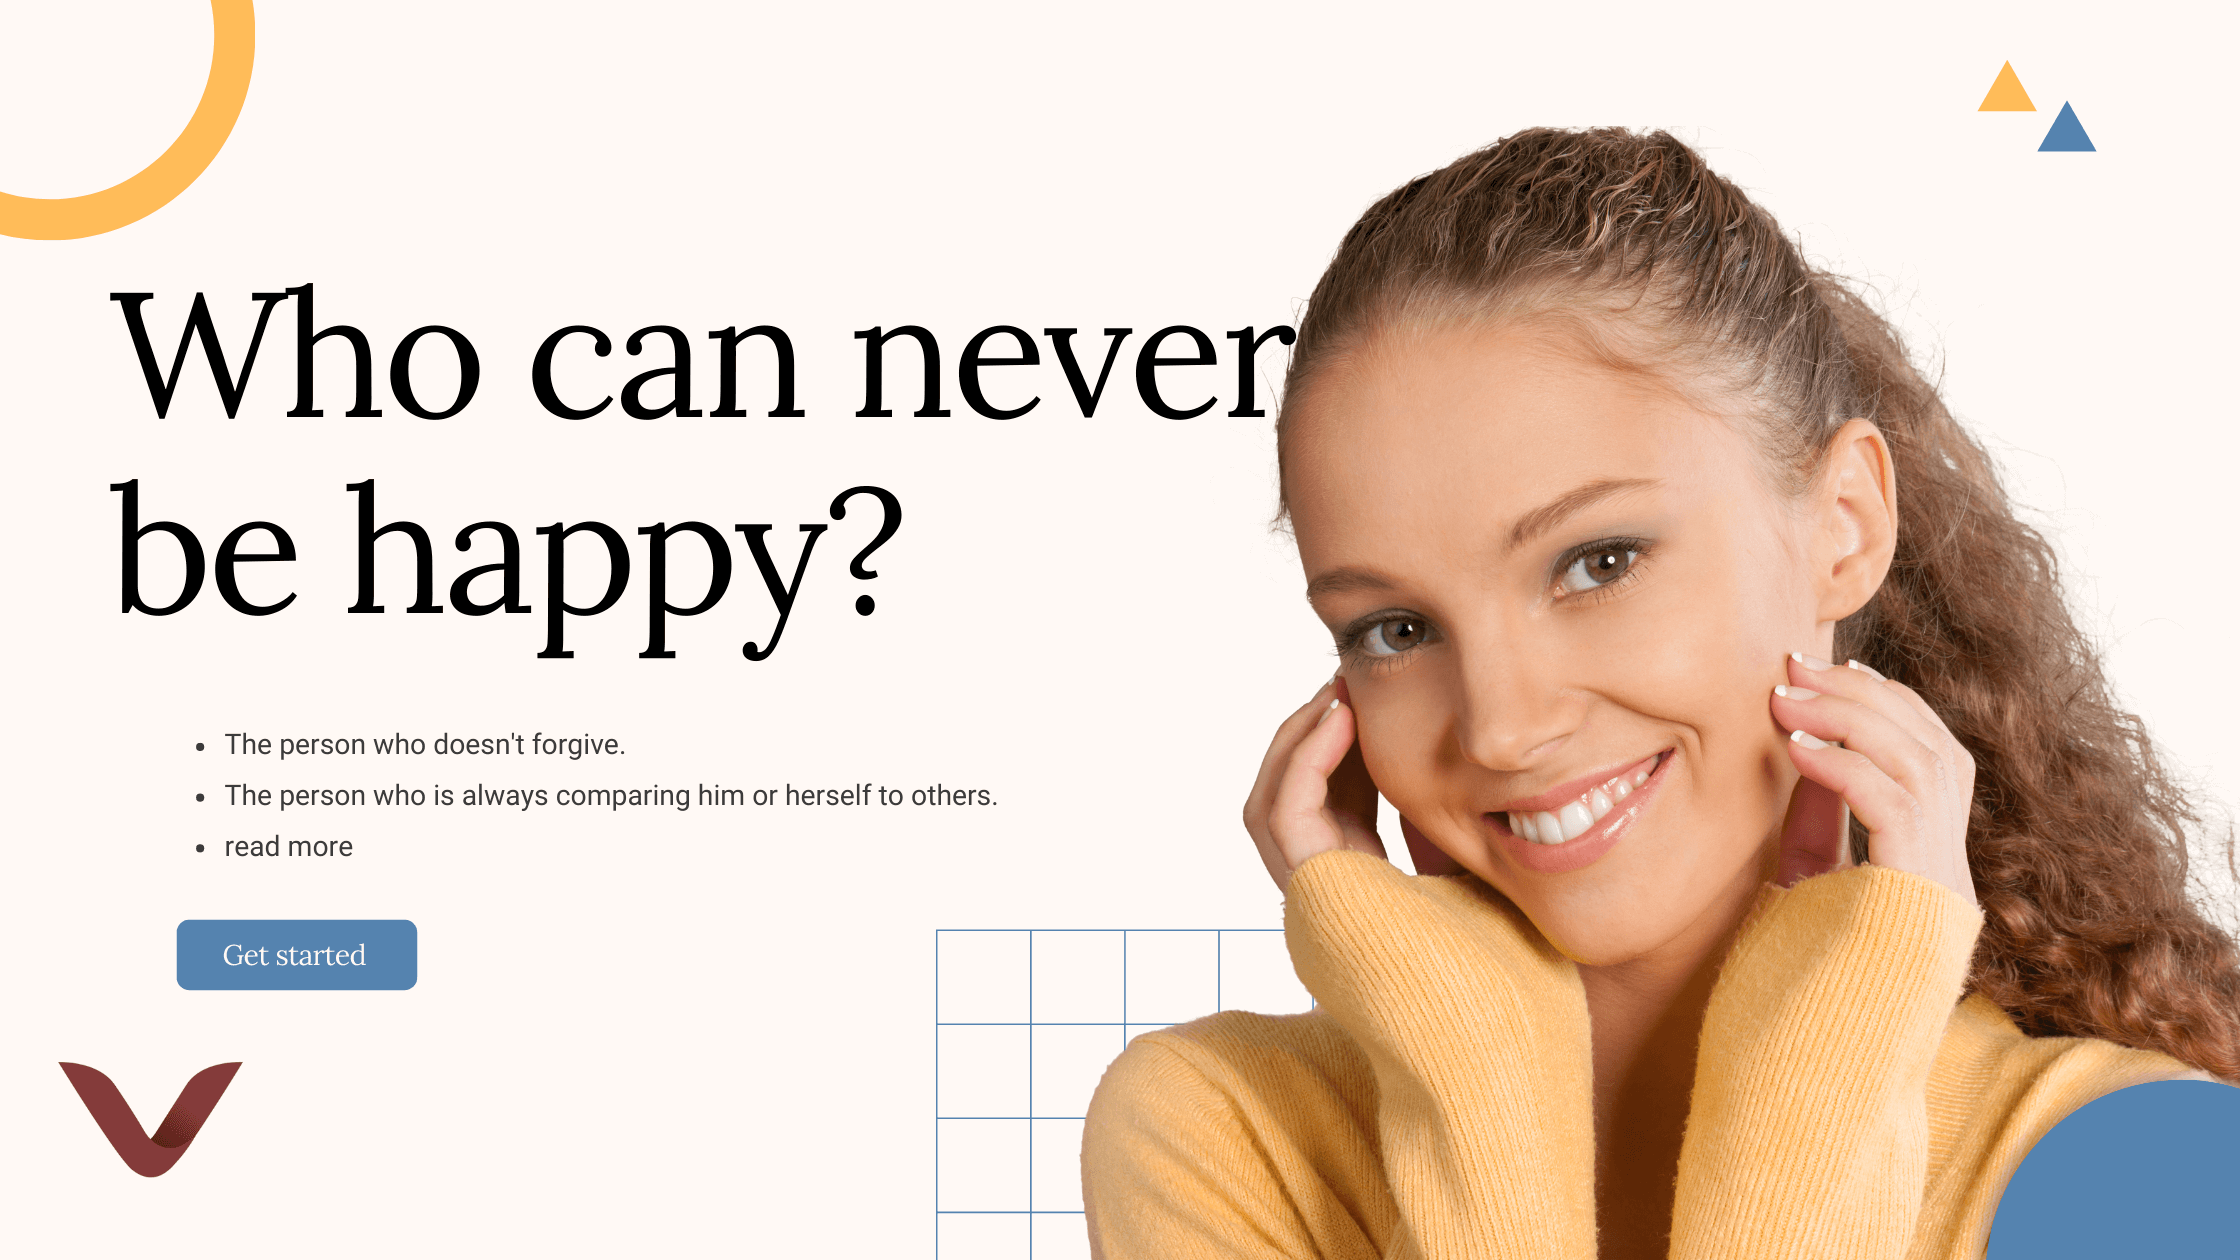 Who can never be happy?